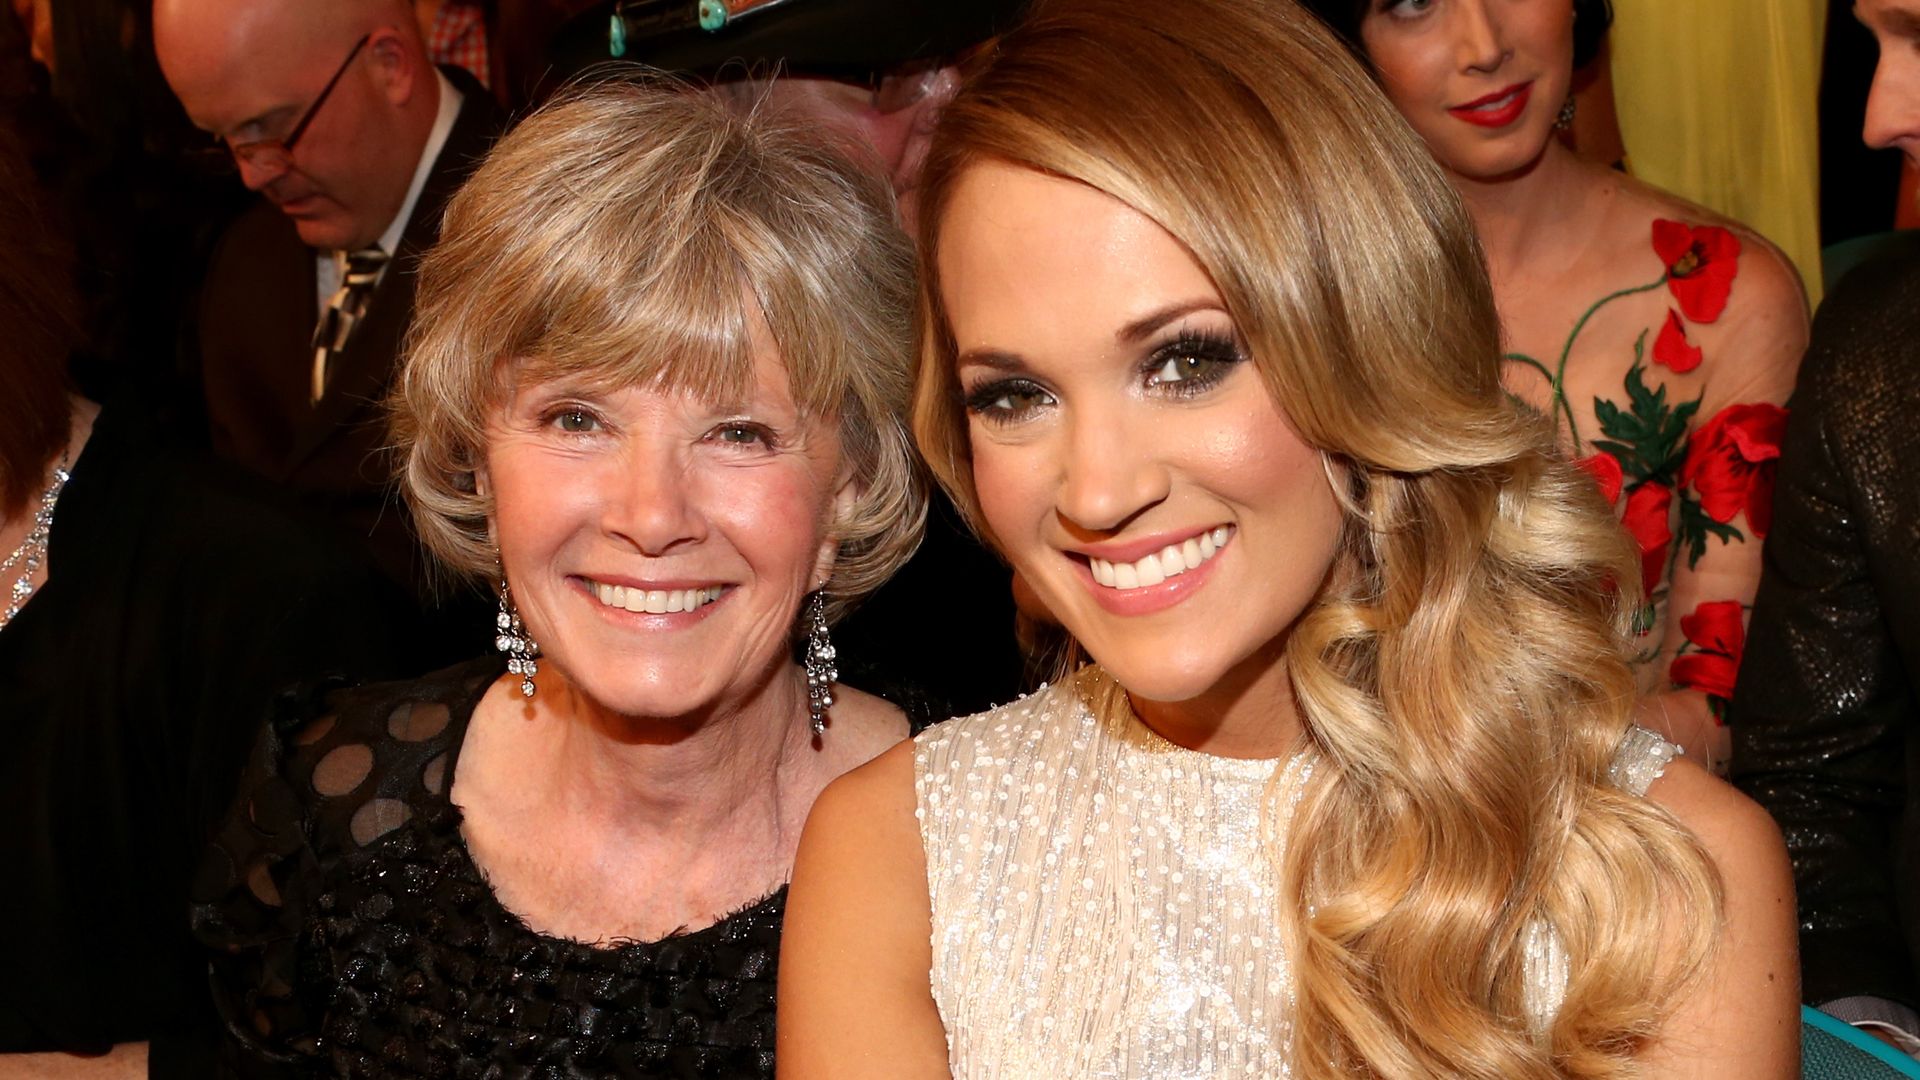 Carrie Underwood and her mom Carole smiling while sat at an awards show